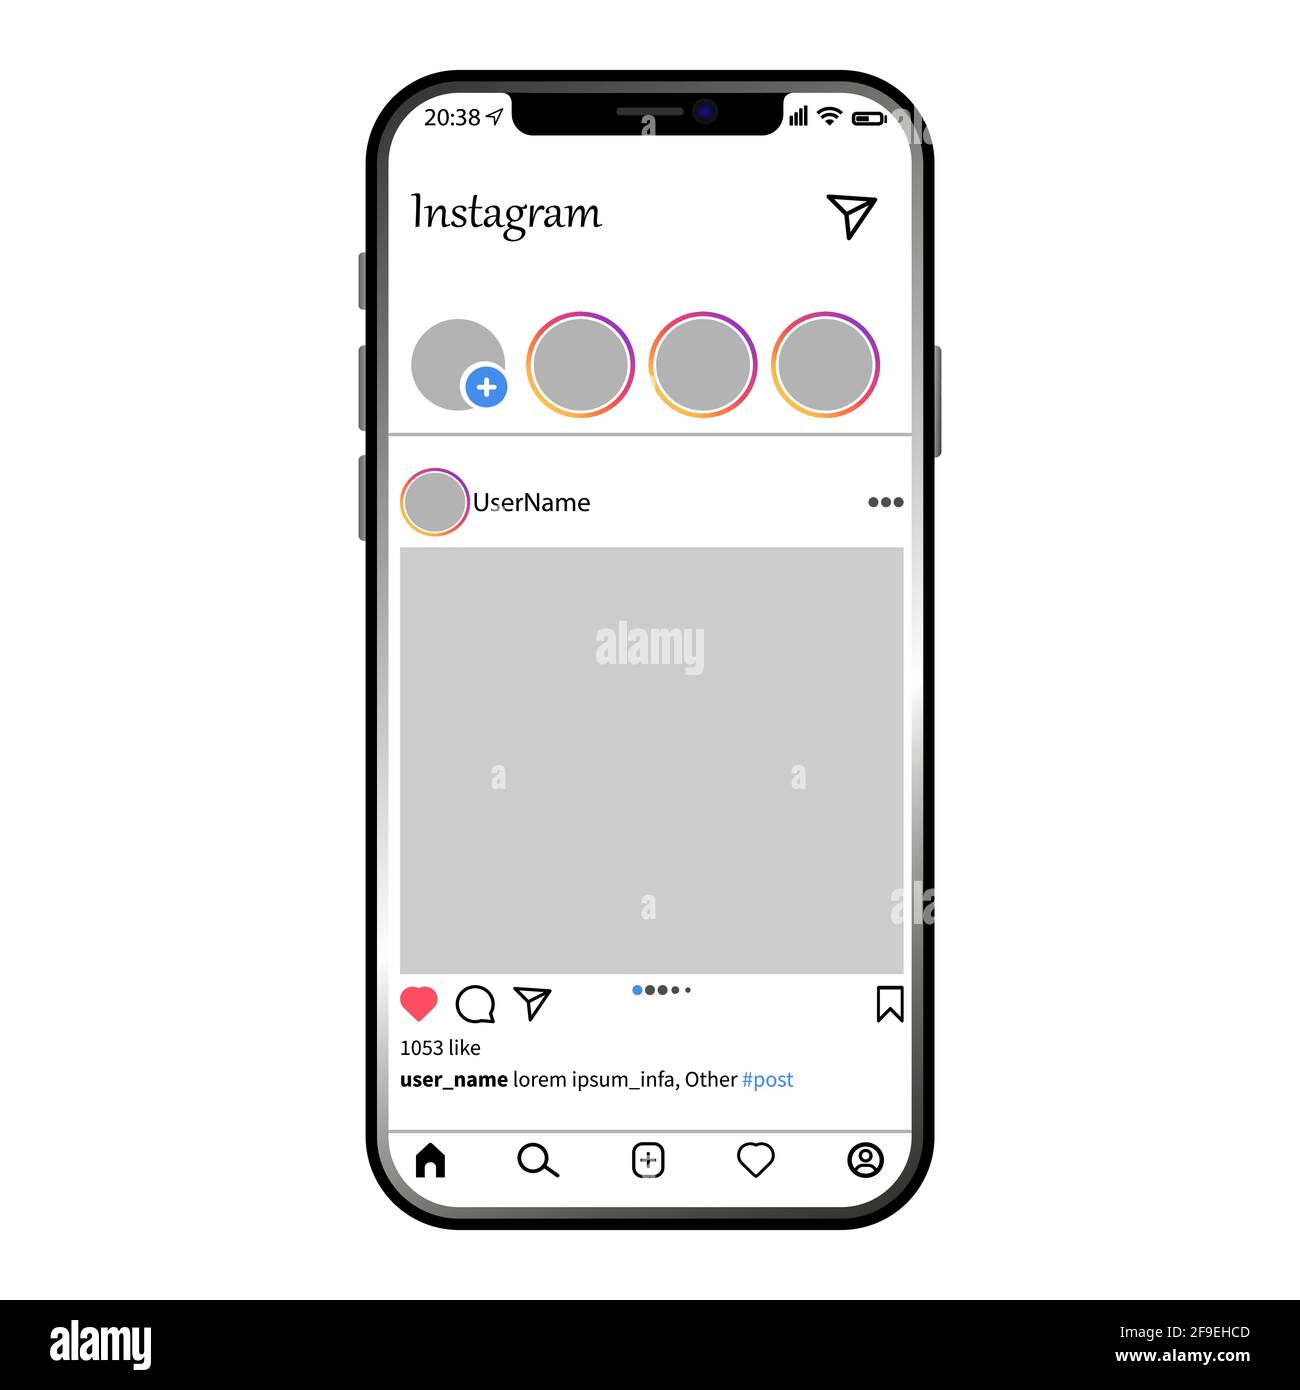 how to post photos on instagram from iphone